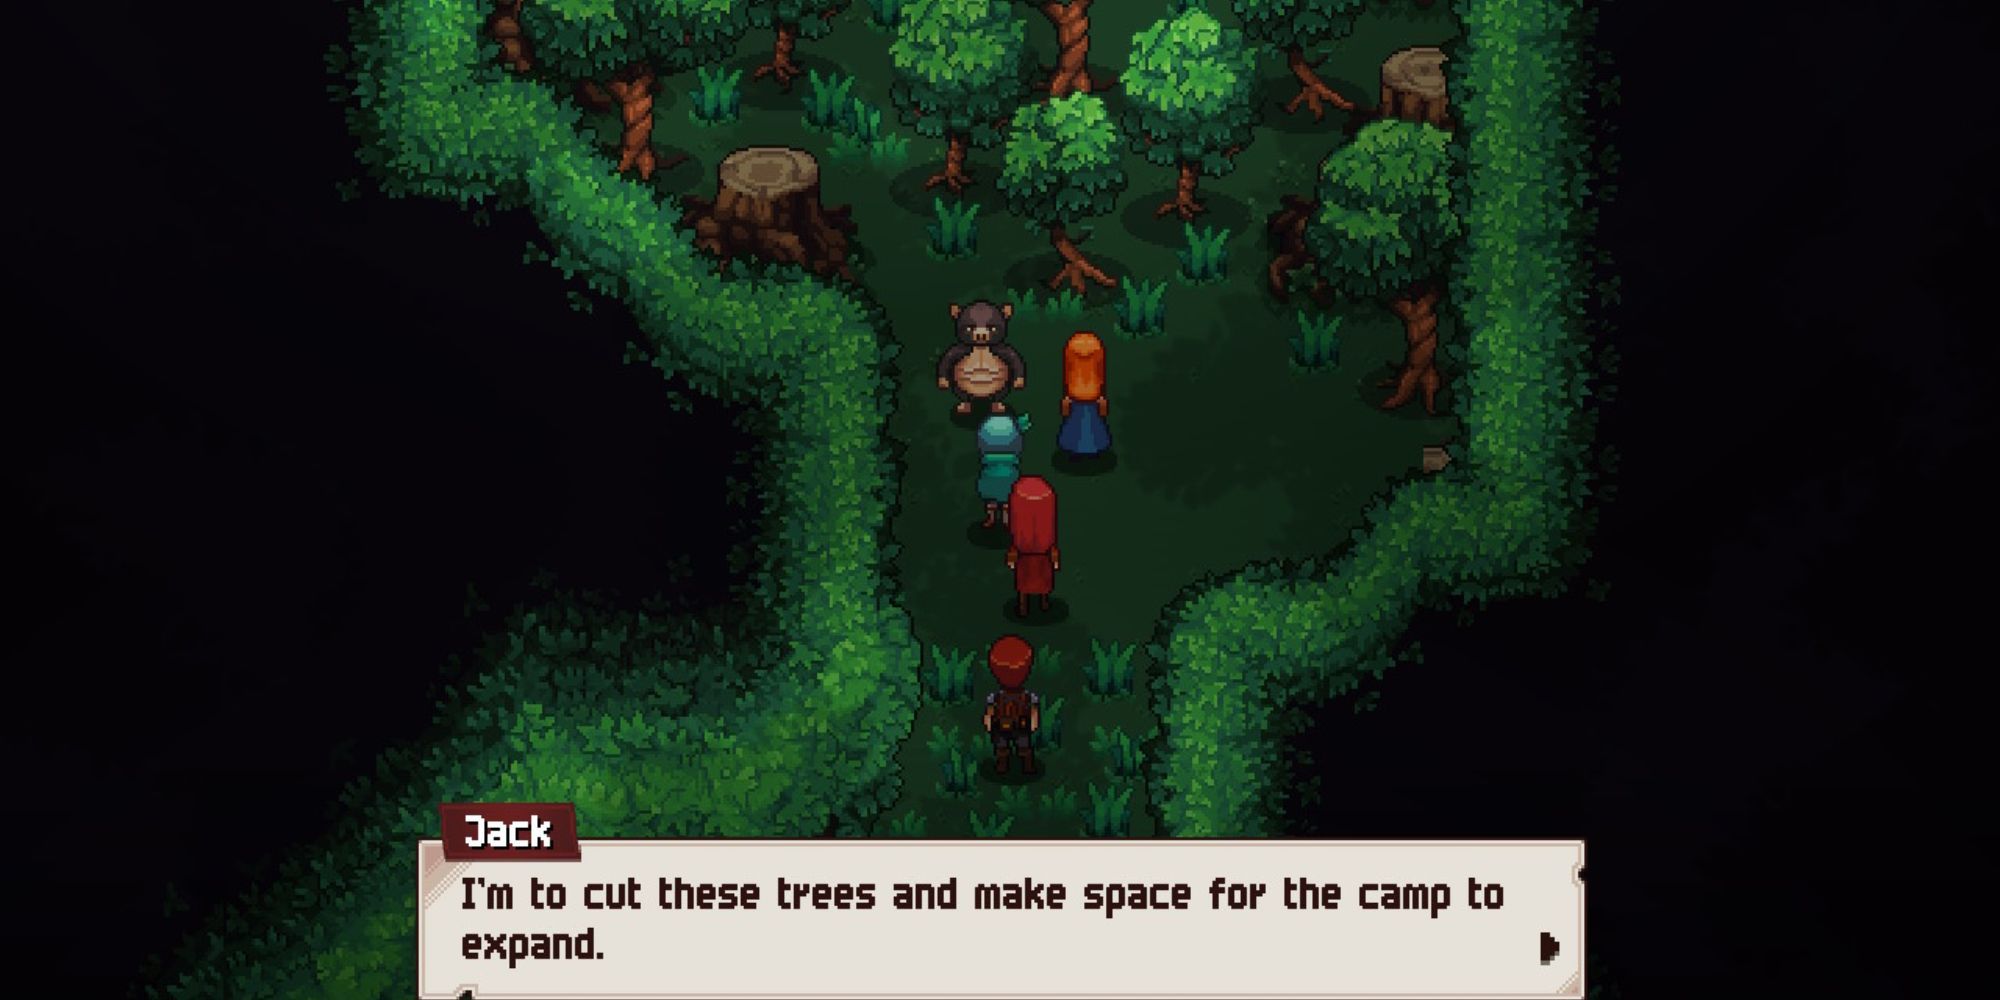 Jack stands in front of some trees in the research camp area of the Fiorwoods